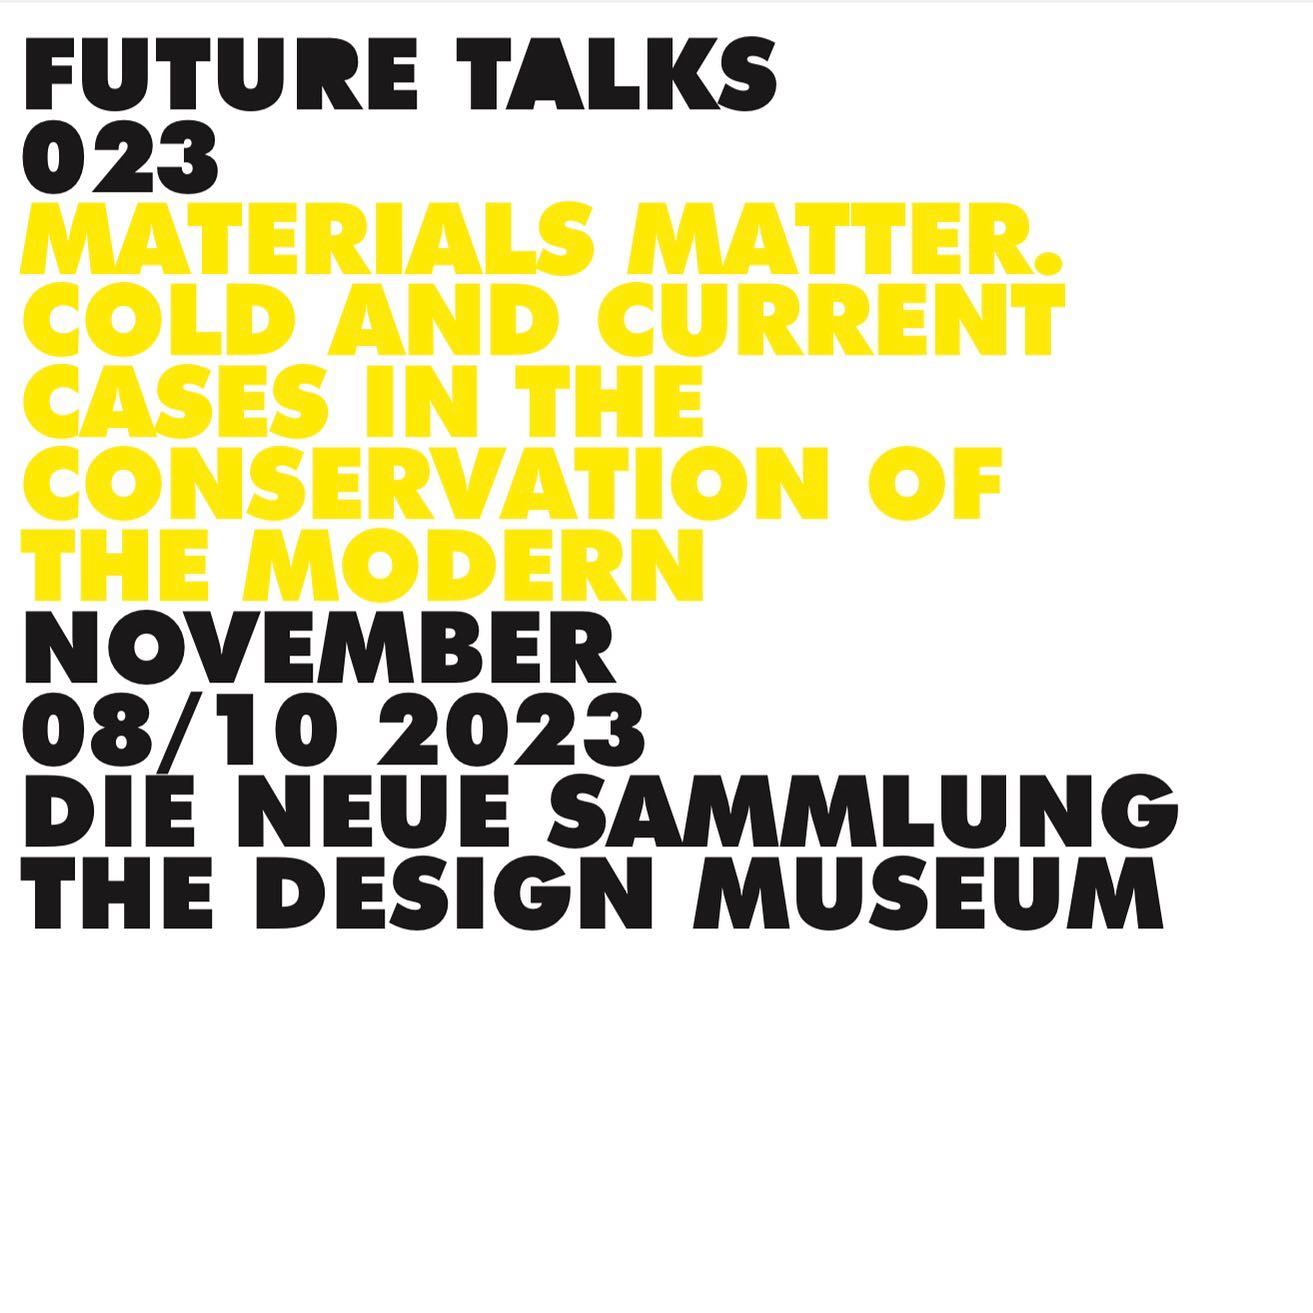 The Conservation Department of Die Neue Sammlung – The Design Museum is pleased to announce…